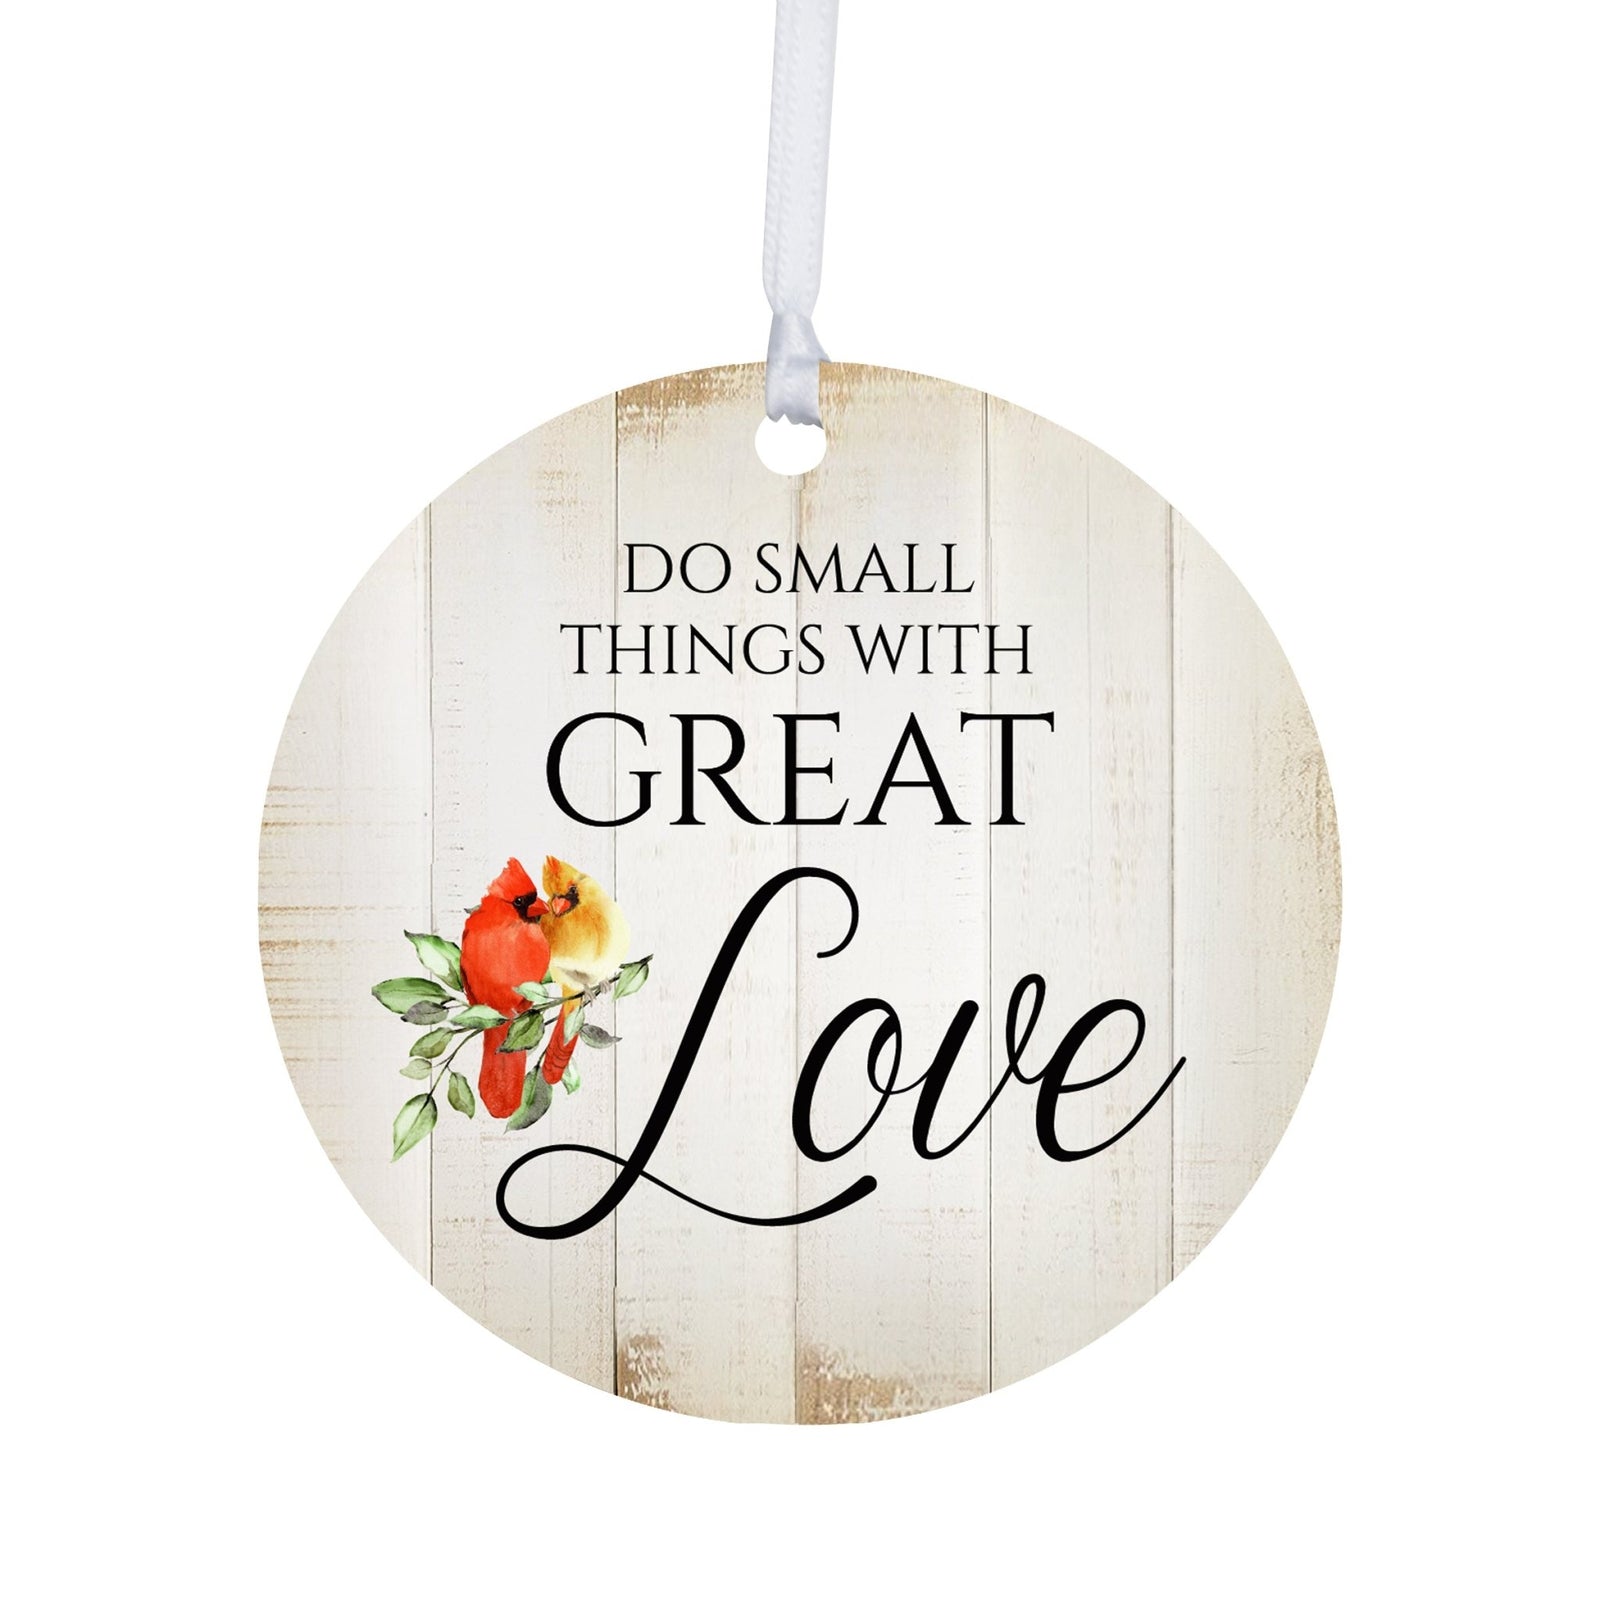 Vintage-Inspired Cardinal Ornament With Everyday Verses Gift Ideas - Do Small Things - LifeSong Milestones